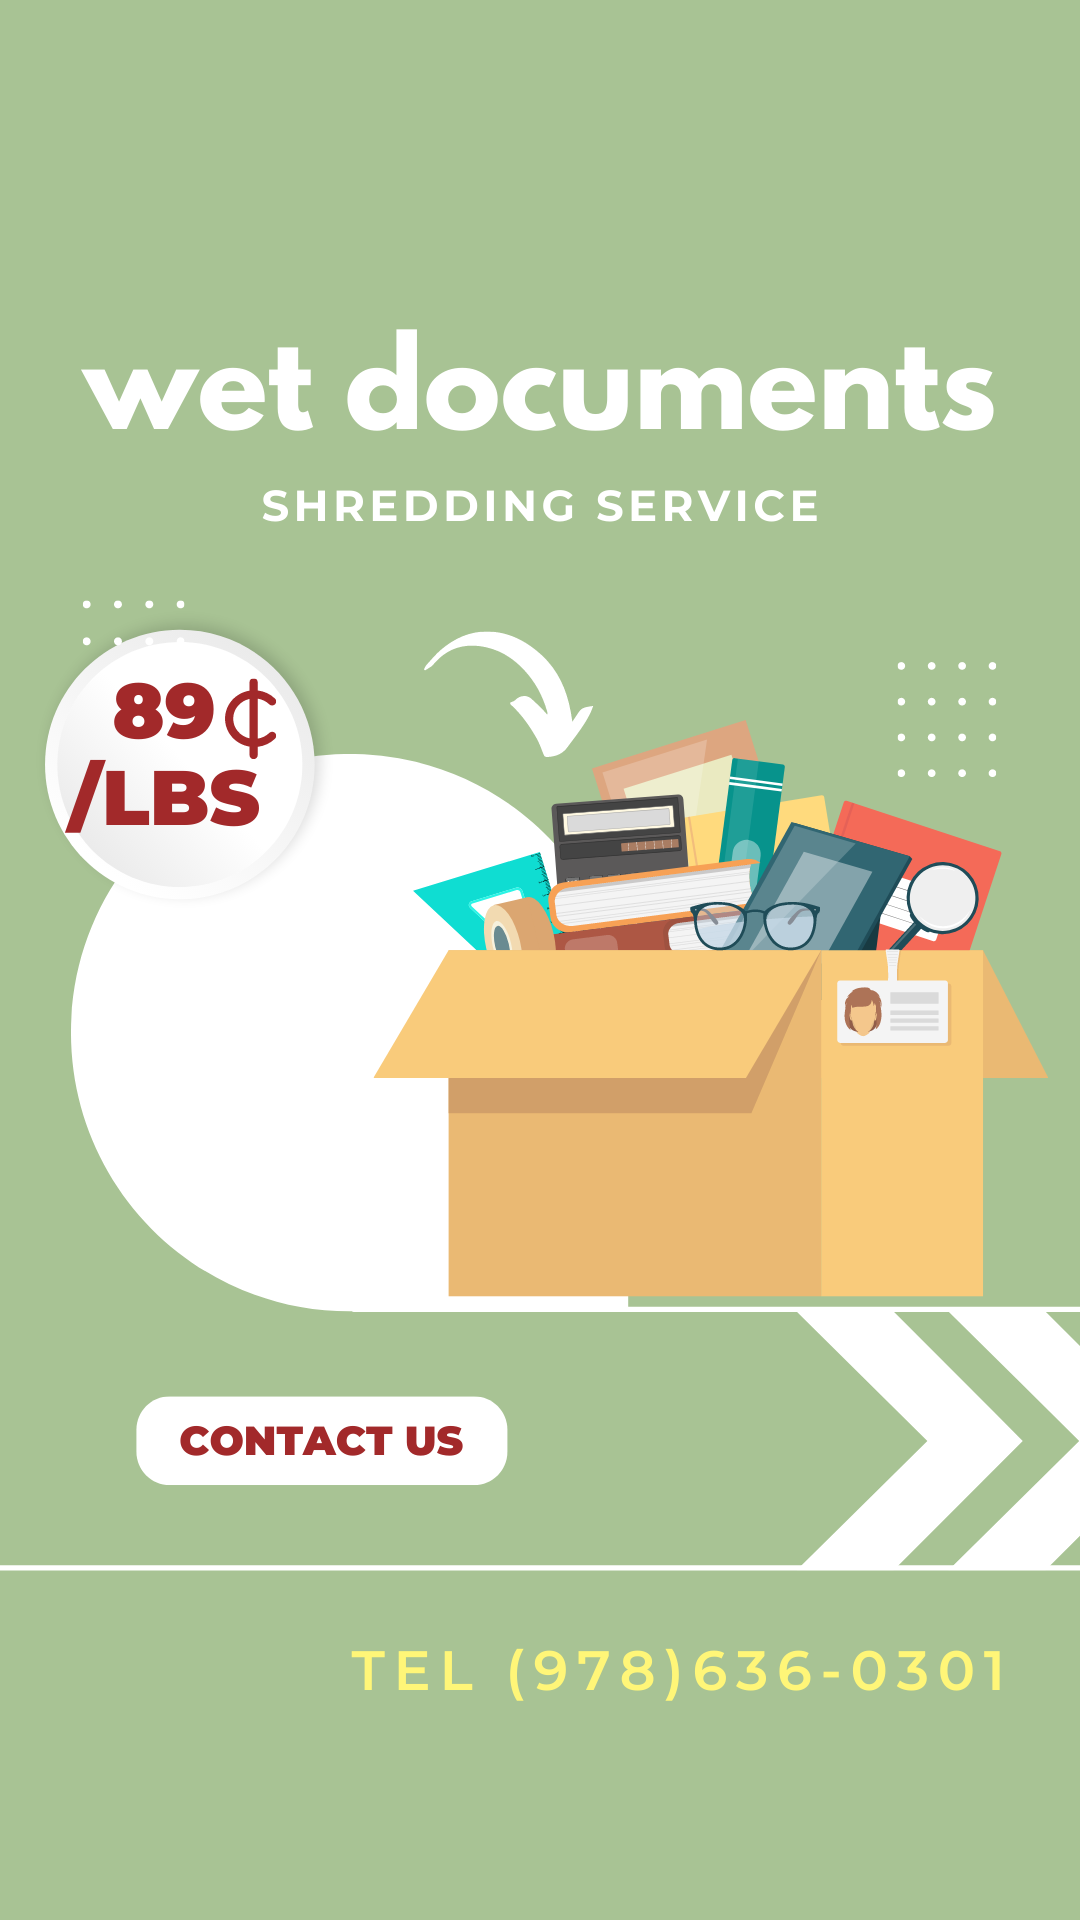 Shred Wet Documents In New Hampshire